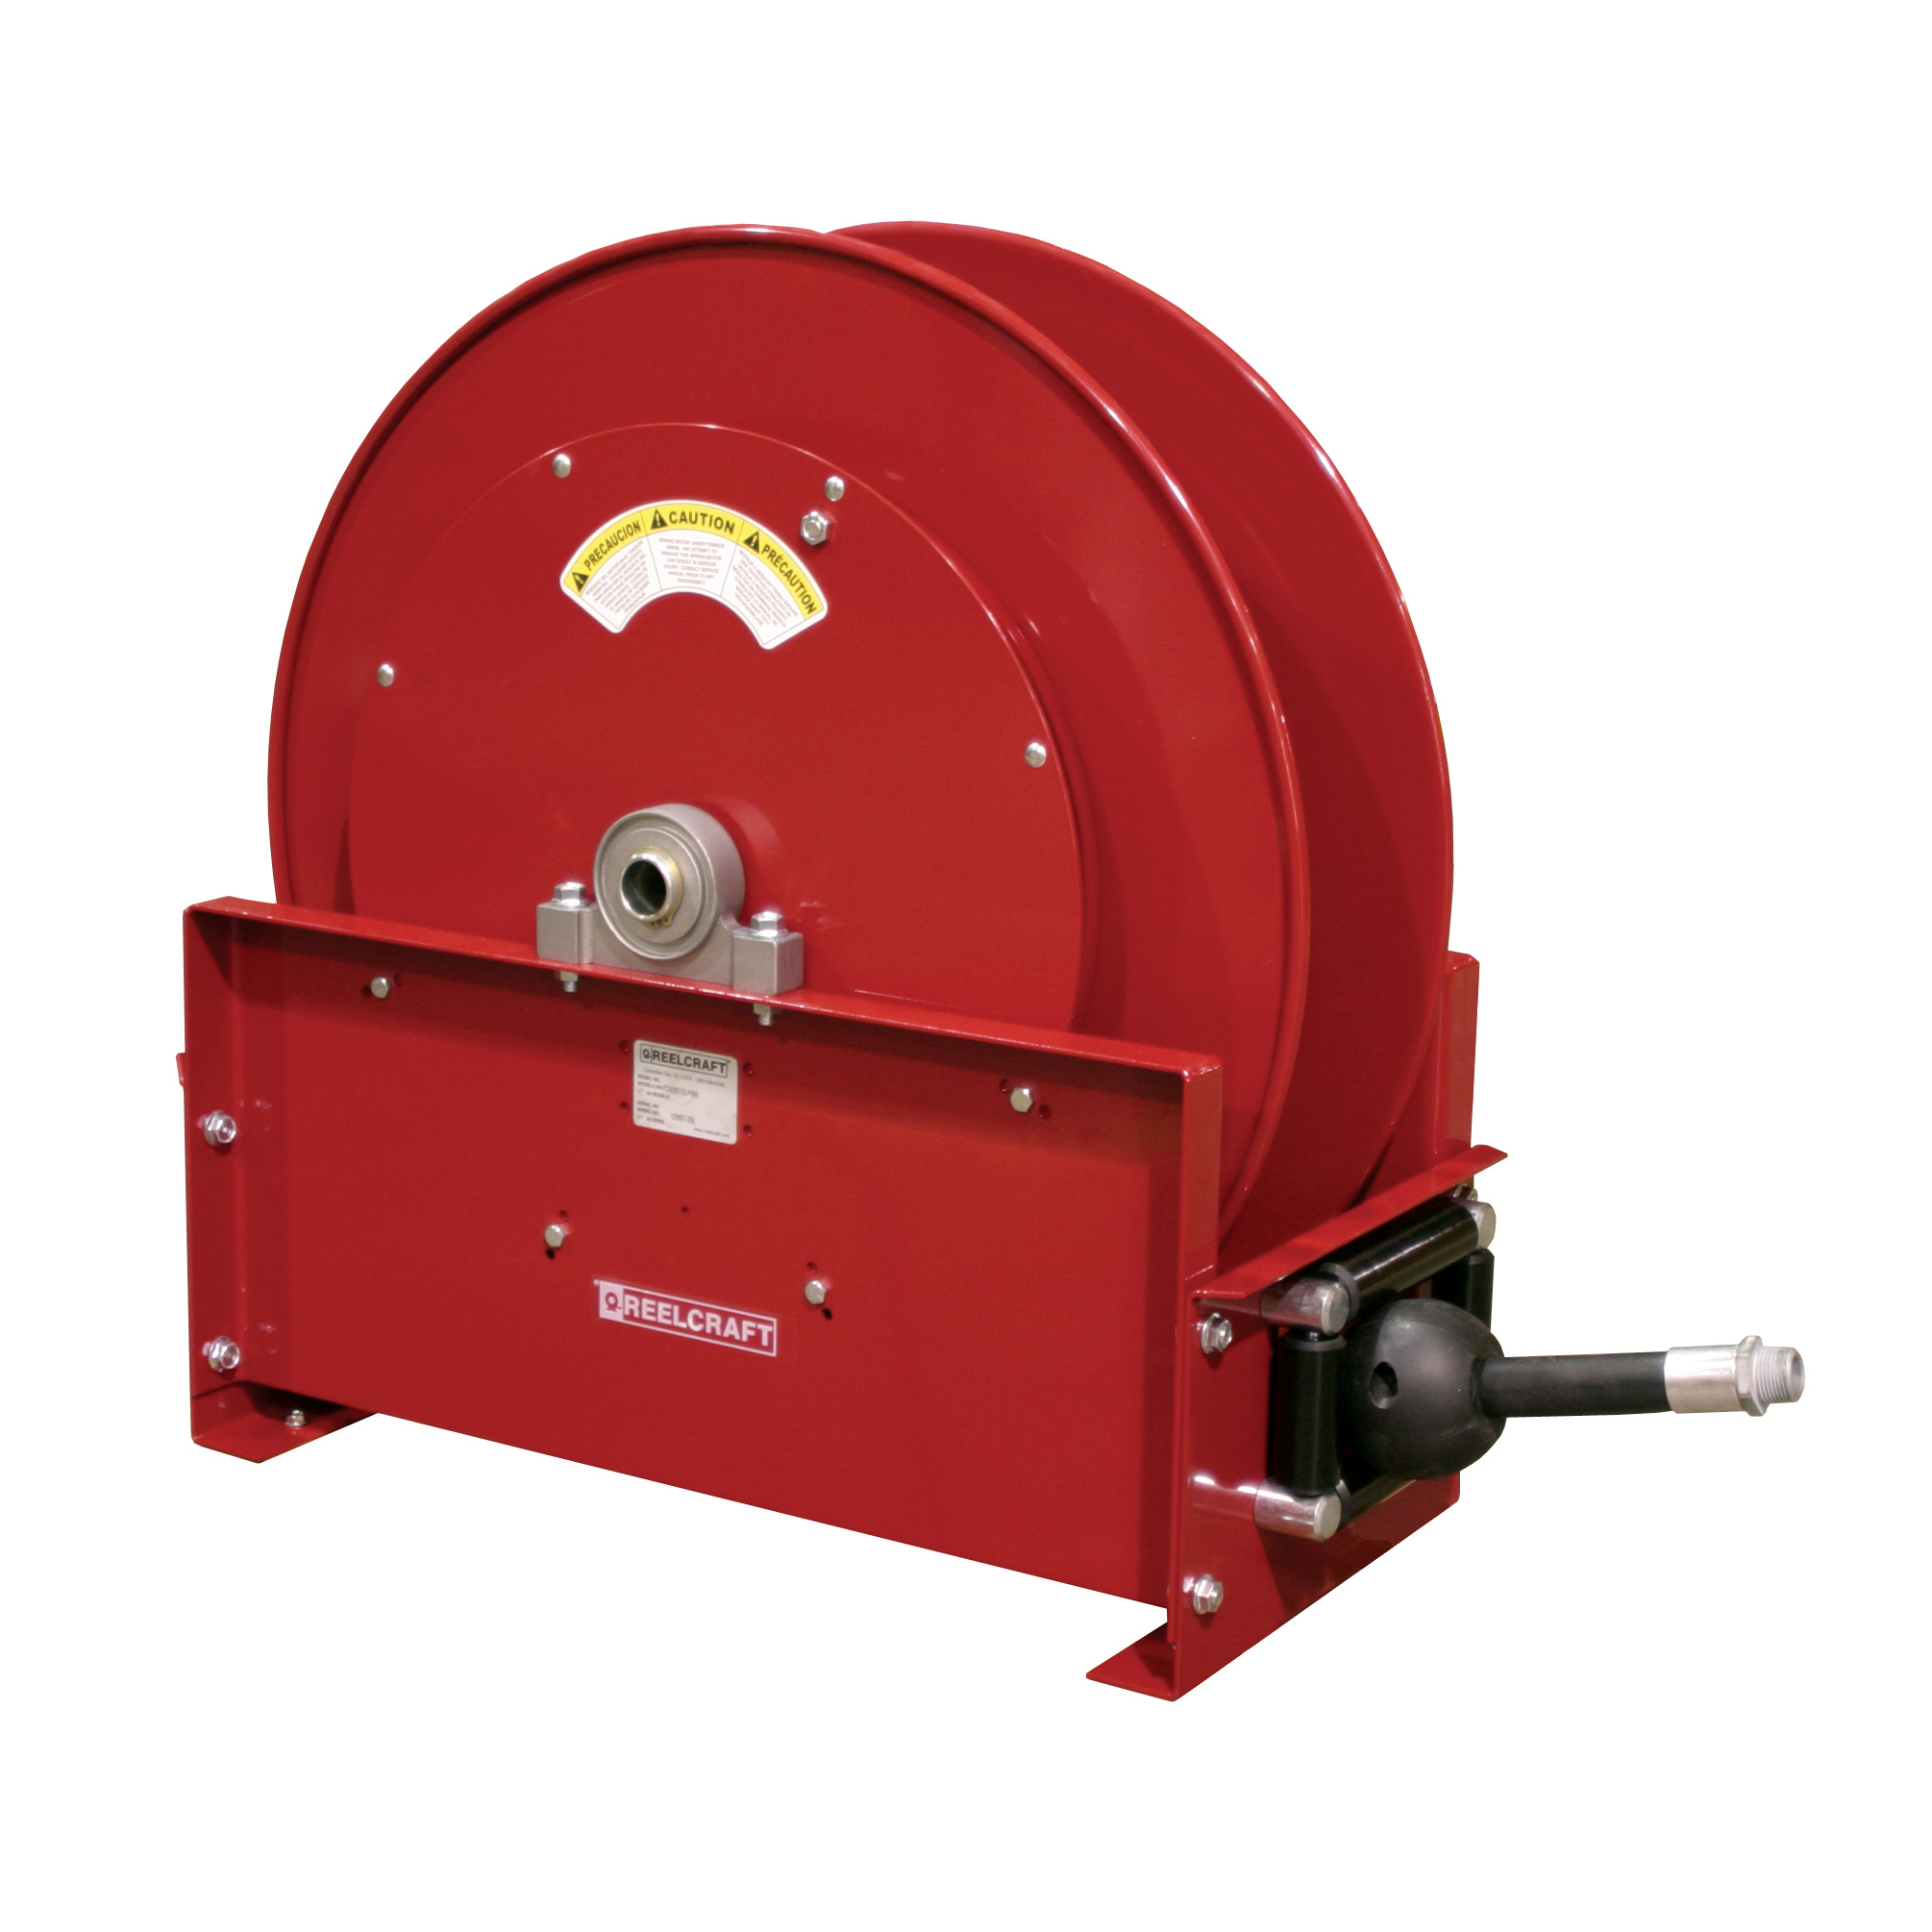 Reelcraft 7650 OHP Hose Reel 3/8 x 50ft. 4800 psi for Grease Service with  Hose